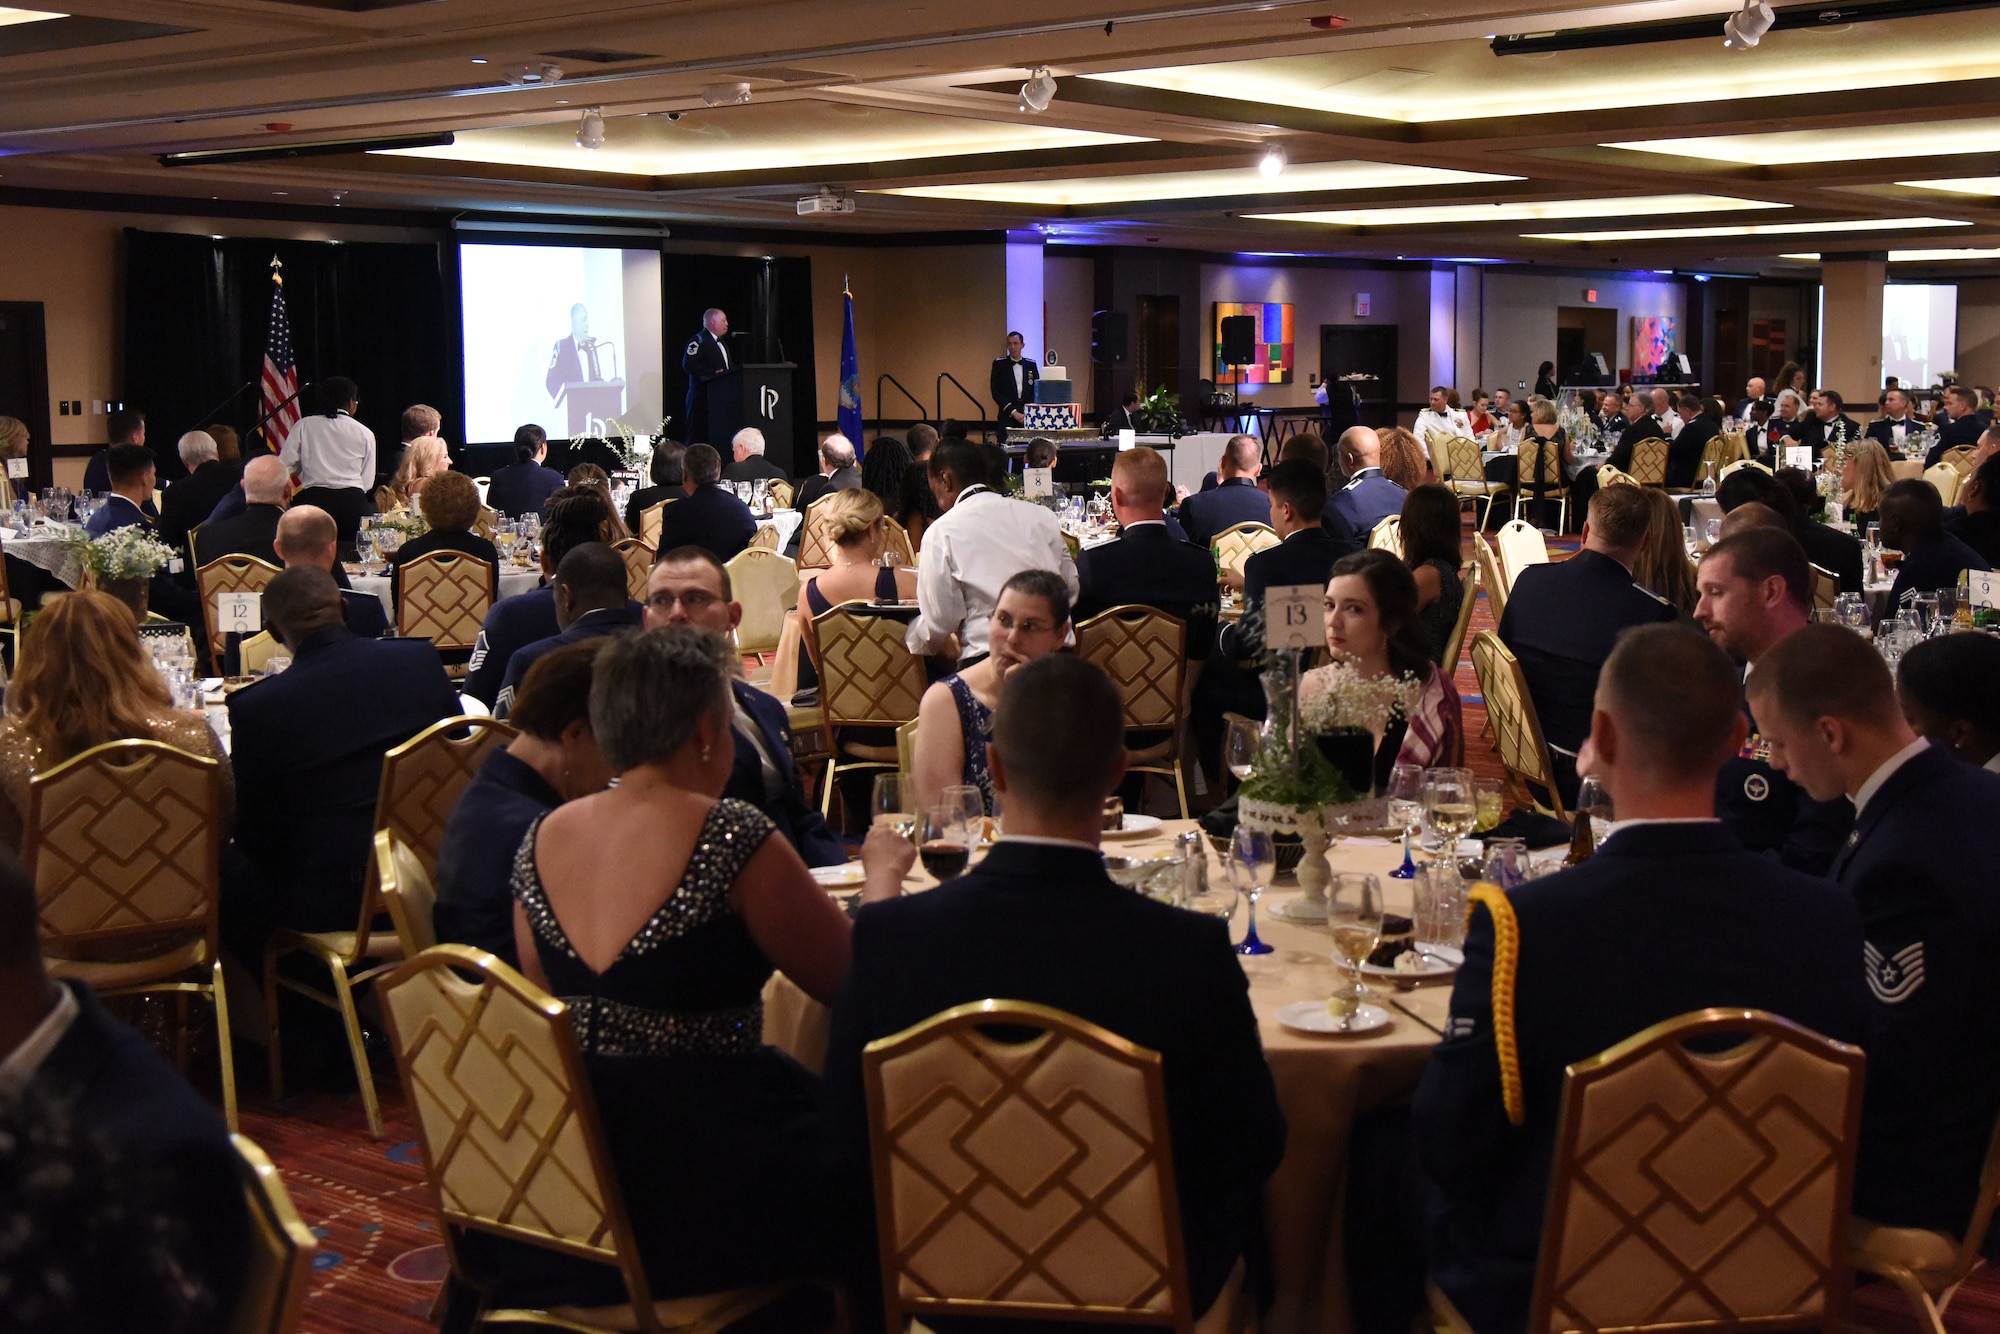 U.S. Air Force Senior Master Sgt. Israel Del Toro, 98th Flying Training Squadron accelerated freefall training program superintendent, U.S. Air Force Academy, Colorado, delivers remarks during the U.S Air Force 71st Birthday Ball at the Imperial Palace Casino, Biloxi, Mississippi, Sept. 22, 2018. The event, hosted by the 81st Training Wing and the John C. Stennis Chapter Air Force Association, also included a cake cutting ceremony. (U.S. Air Force photo by Kemberly Groue)